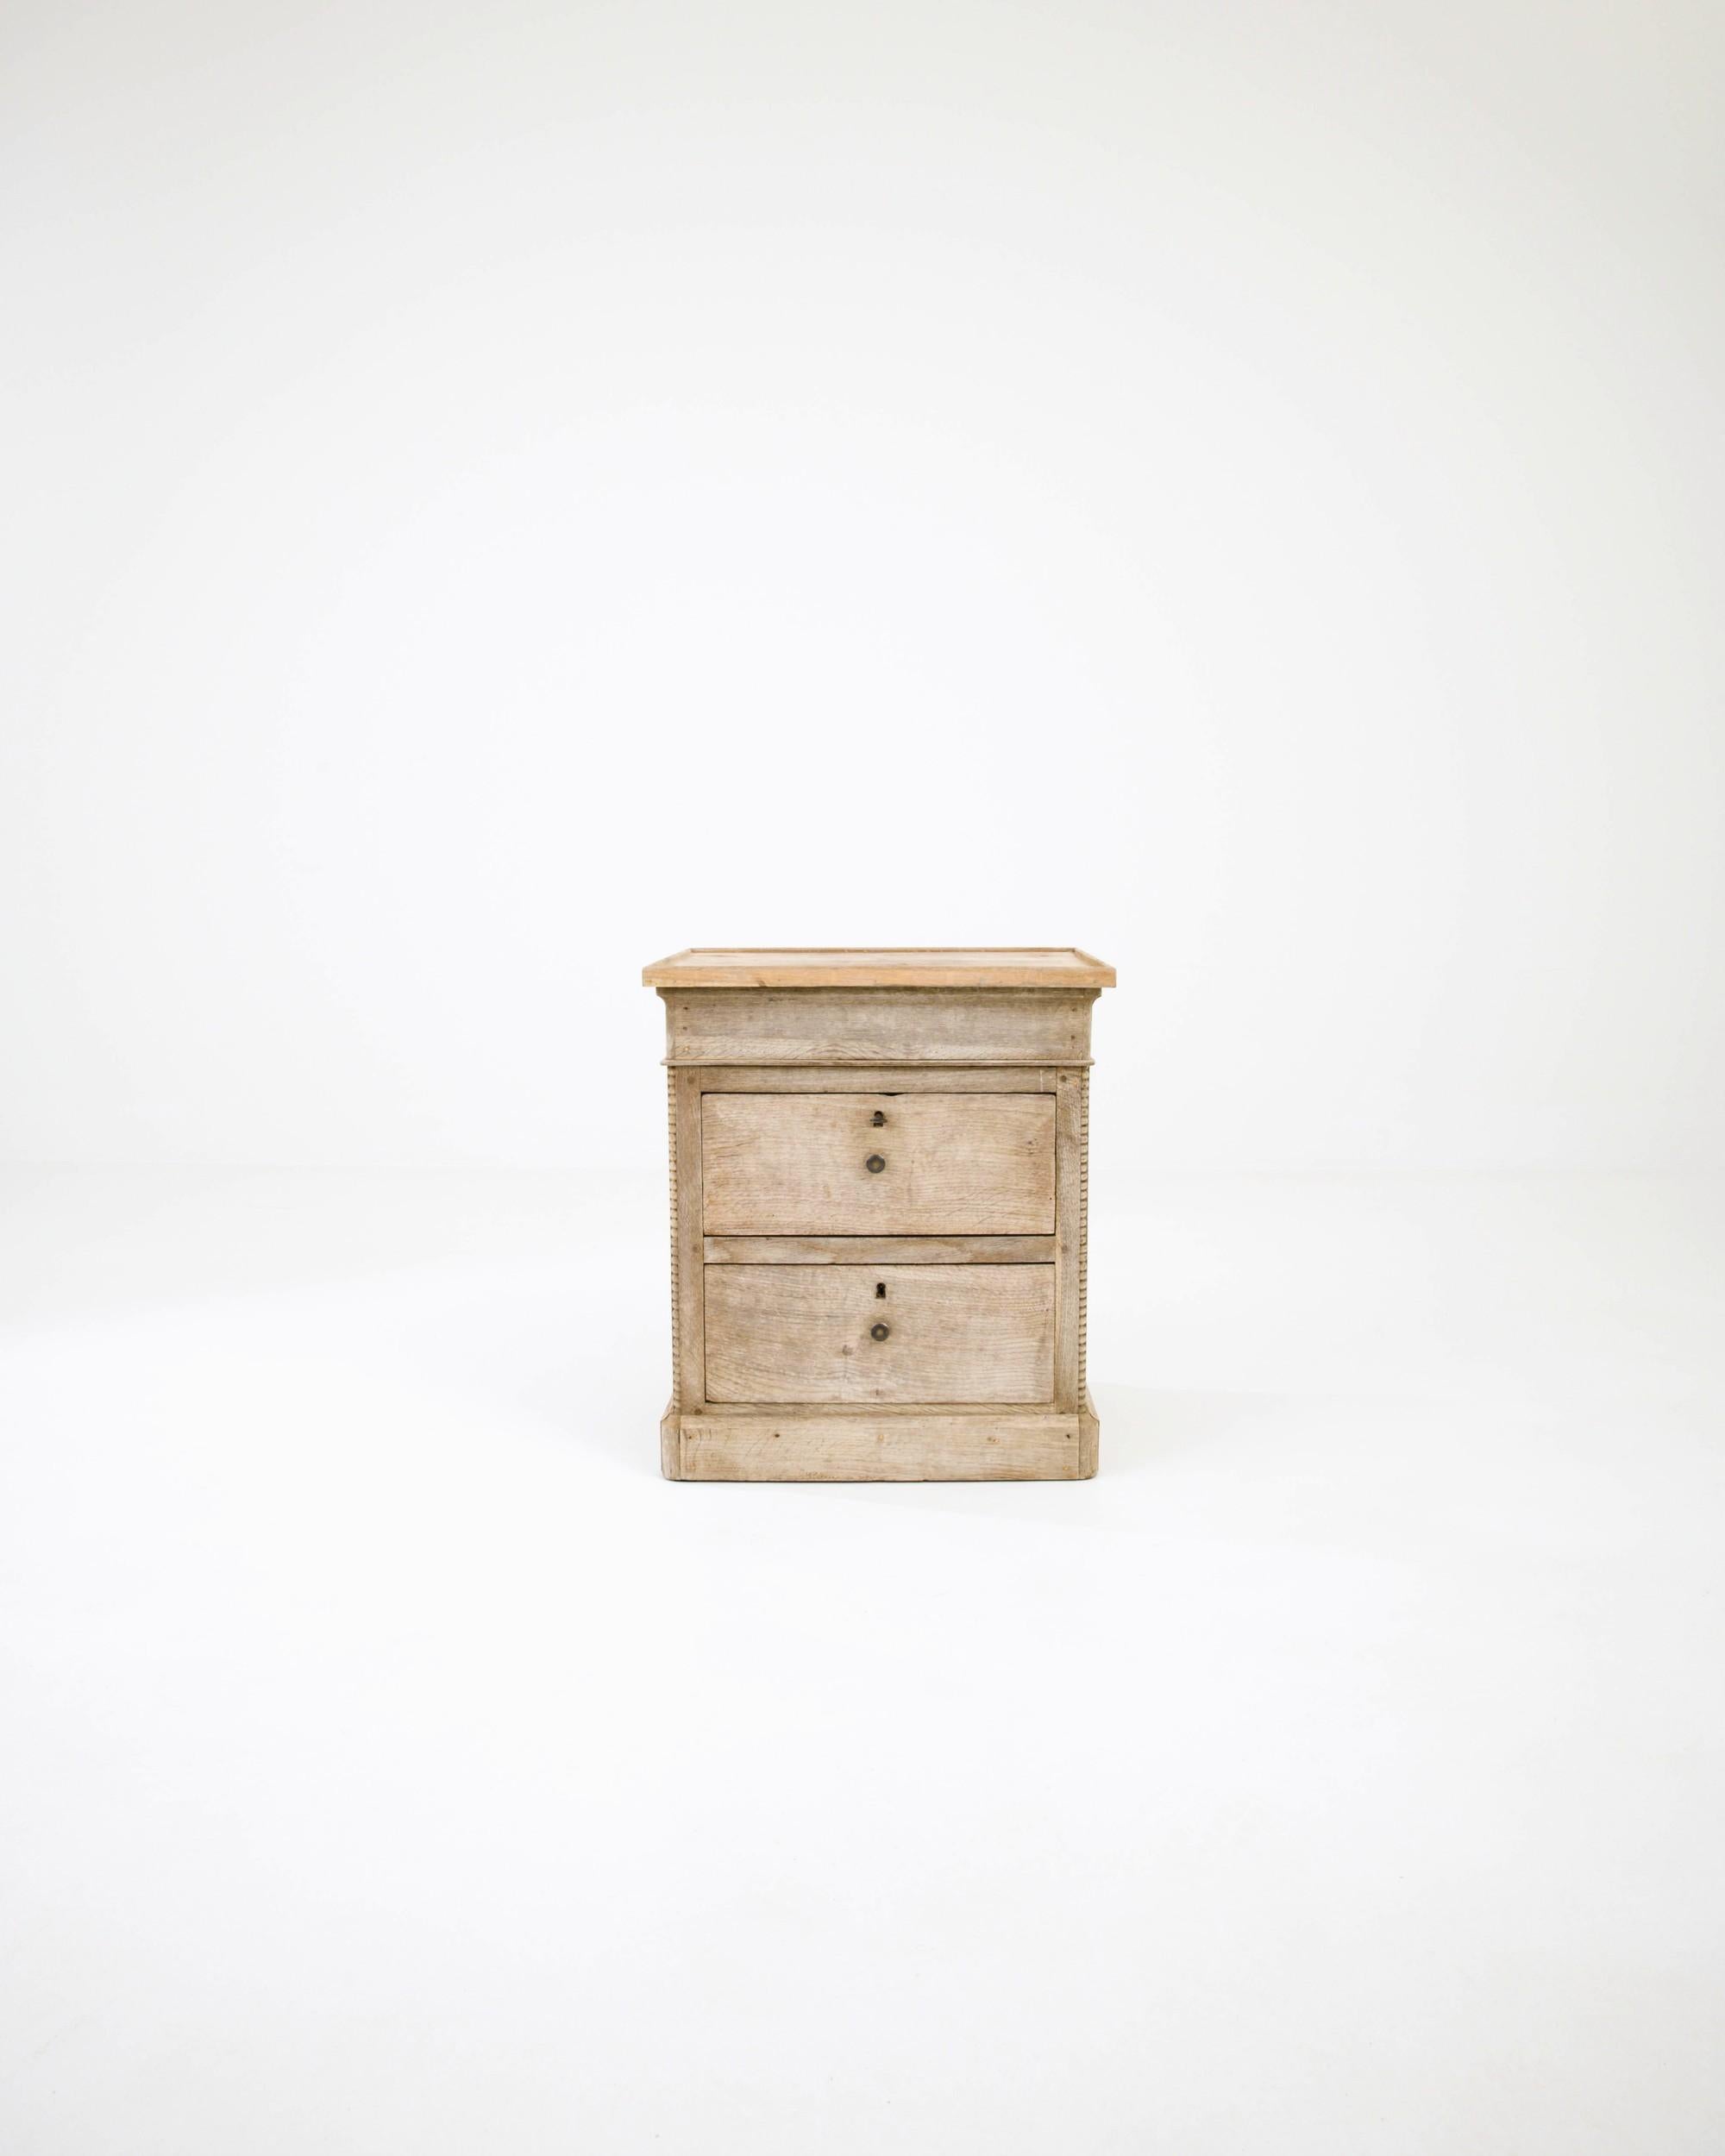 This 19th-century oak night stand originates from France. It features two deep drawers with original brass knobs, and it is adorned with carved beads along the sides. The plinth base and profiled top, gives the chest a resemblance to an ancient